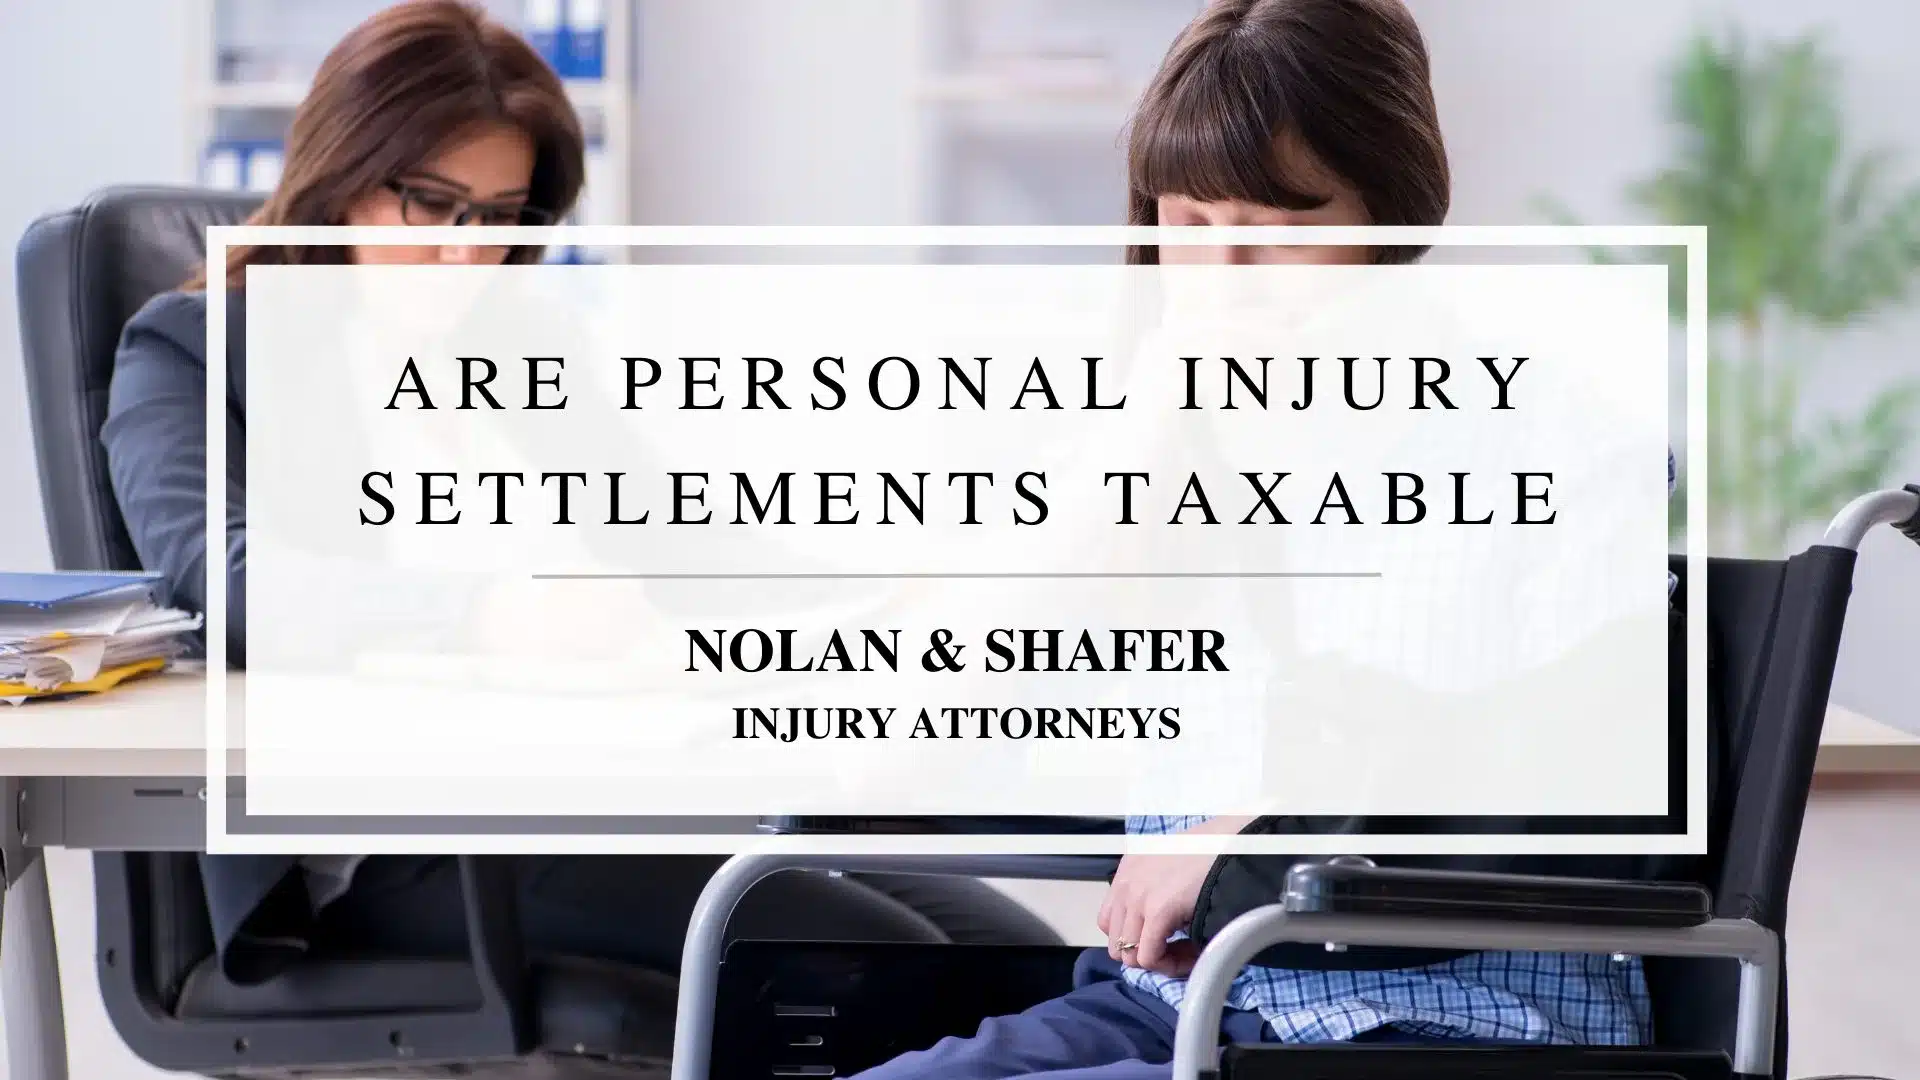 Featured image of personal injury settlement